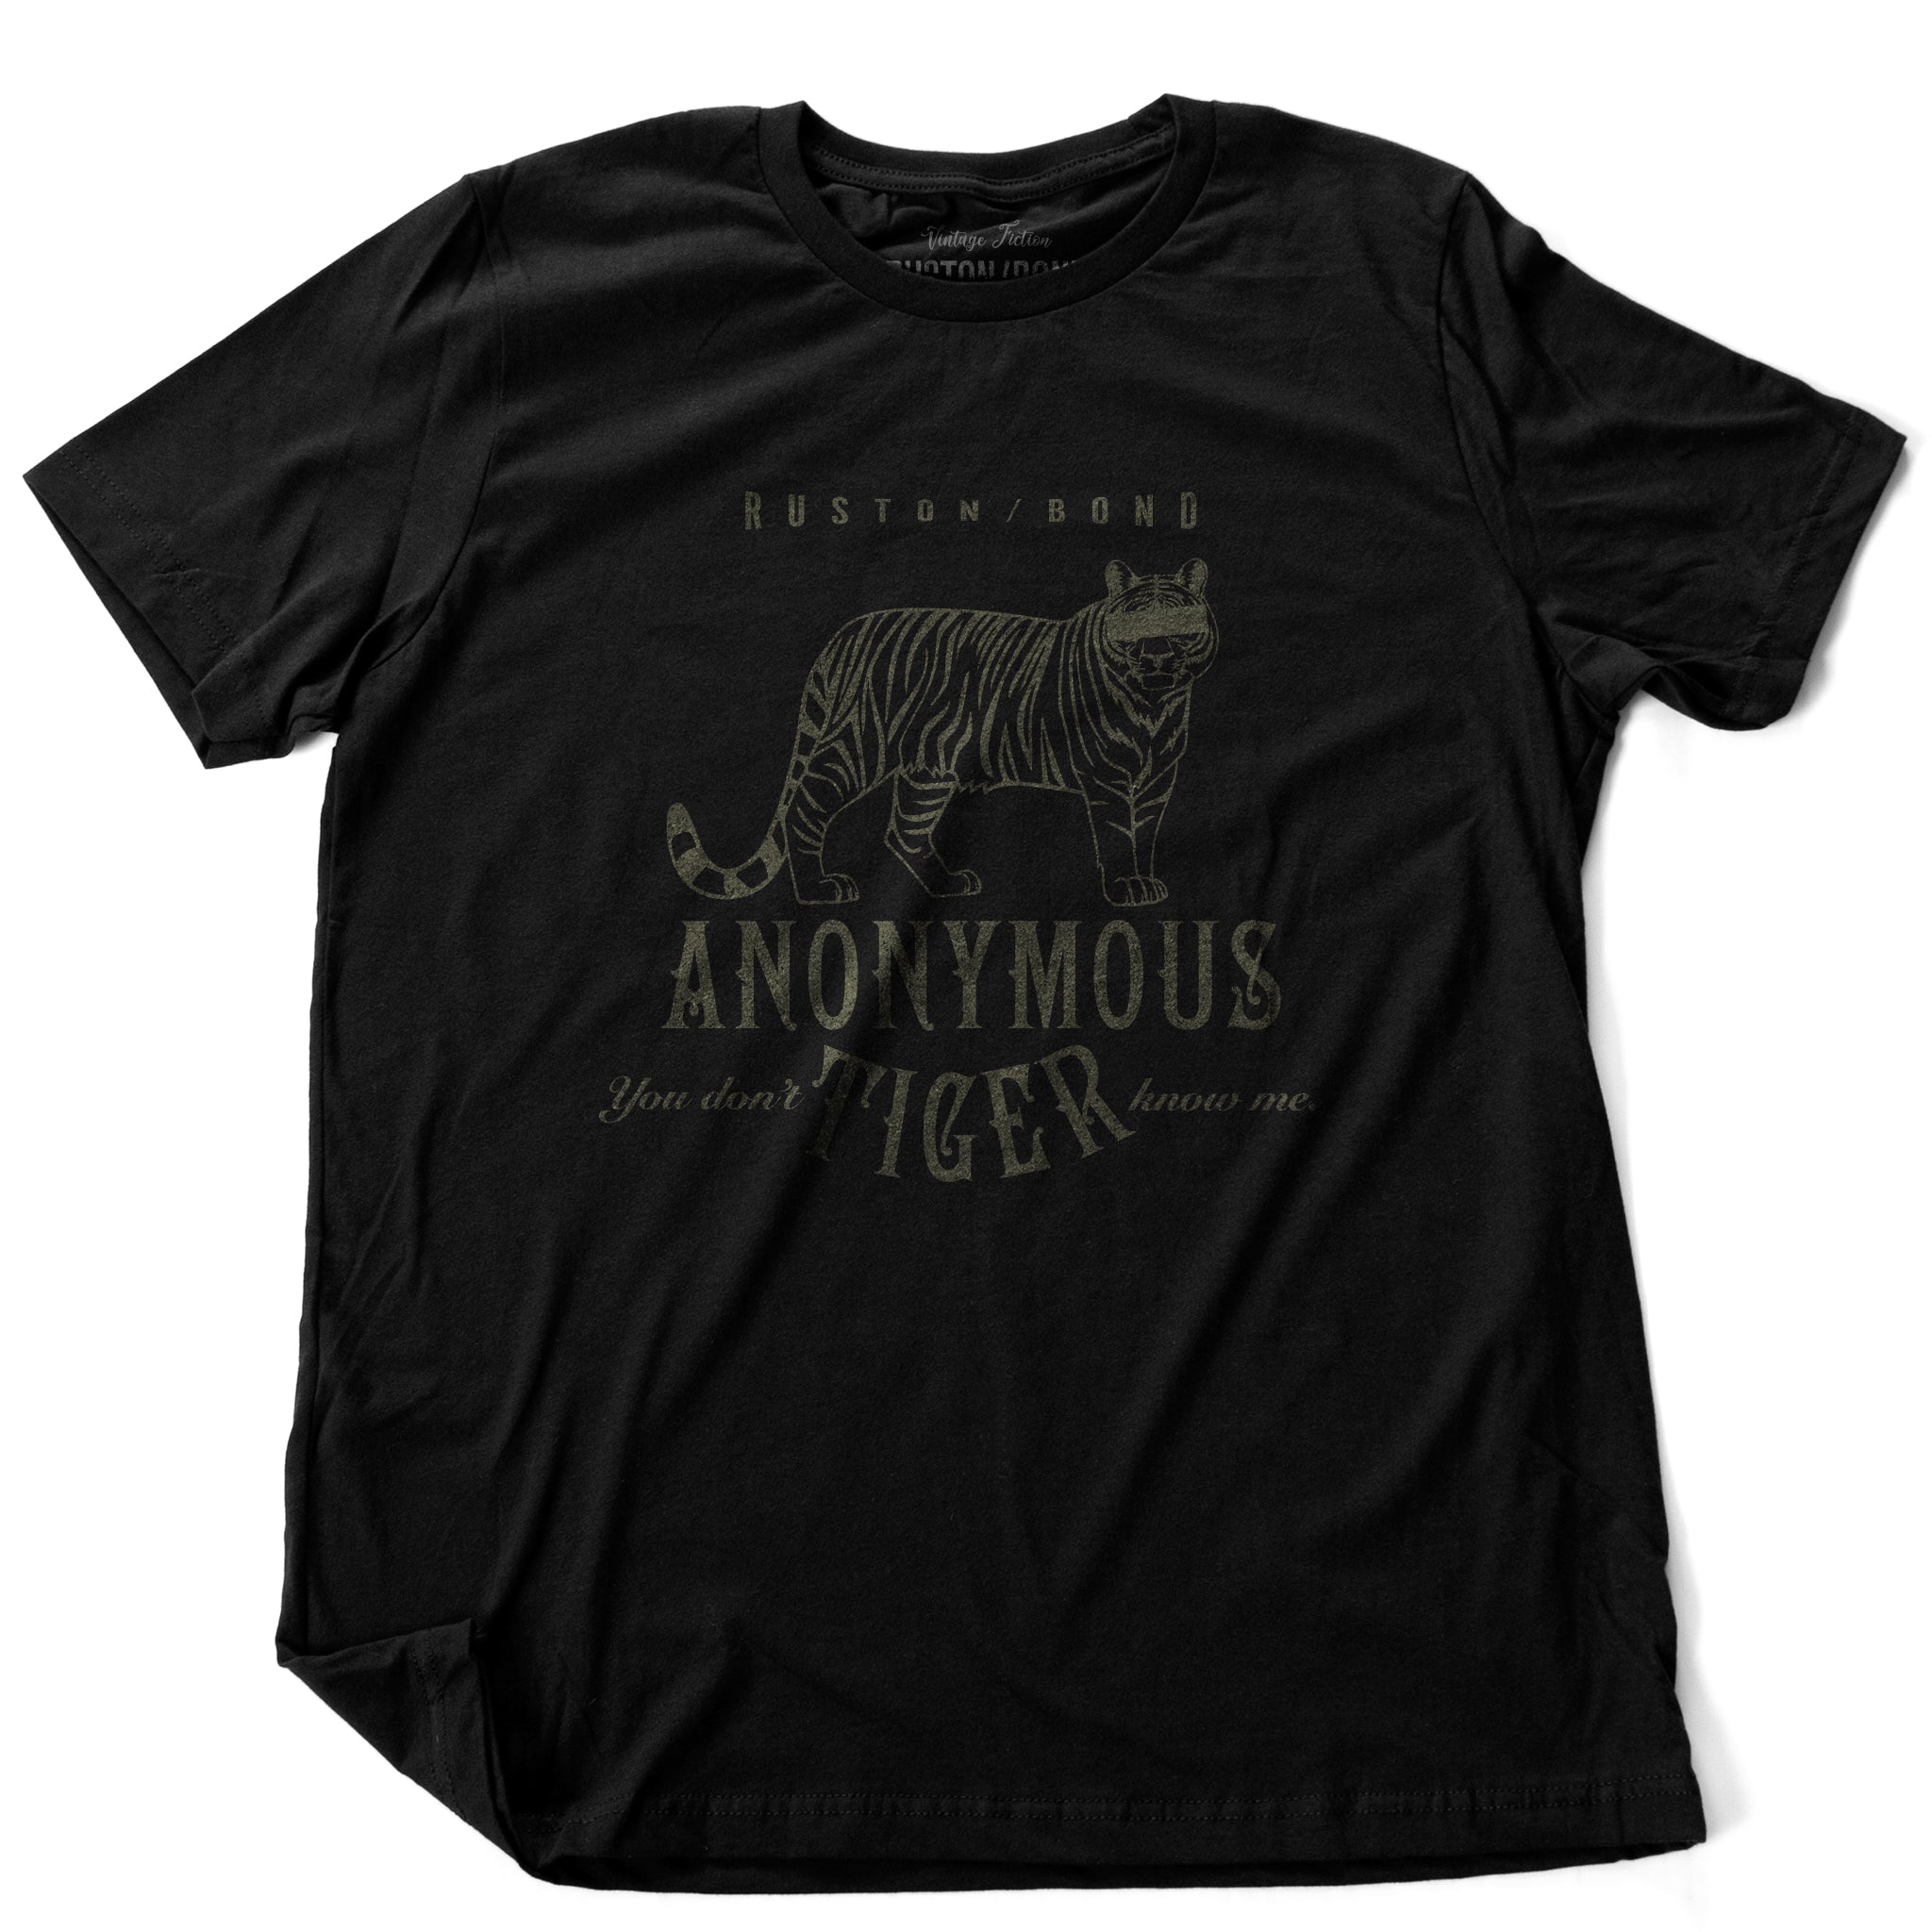 Black retro, vintage-inspired fashion t-shirt with a sarcastic graphic of a masked, anonymous tiger and the text "You don't know me" by Ruston/Bond brand. From wolfsaint.net